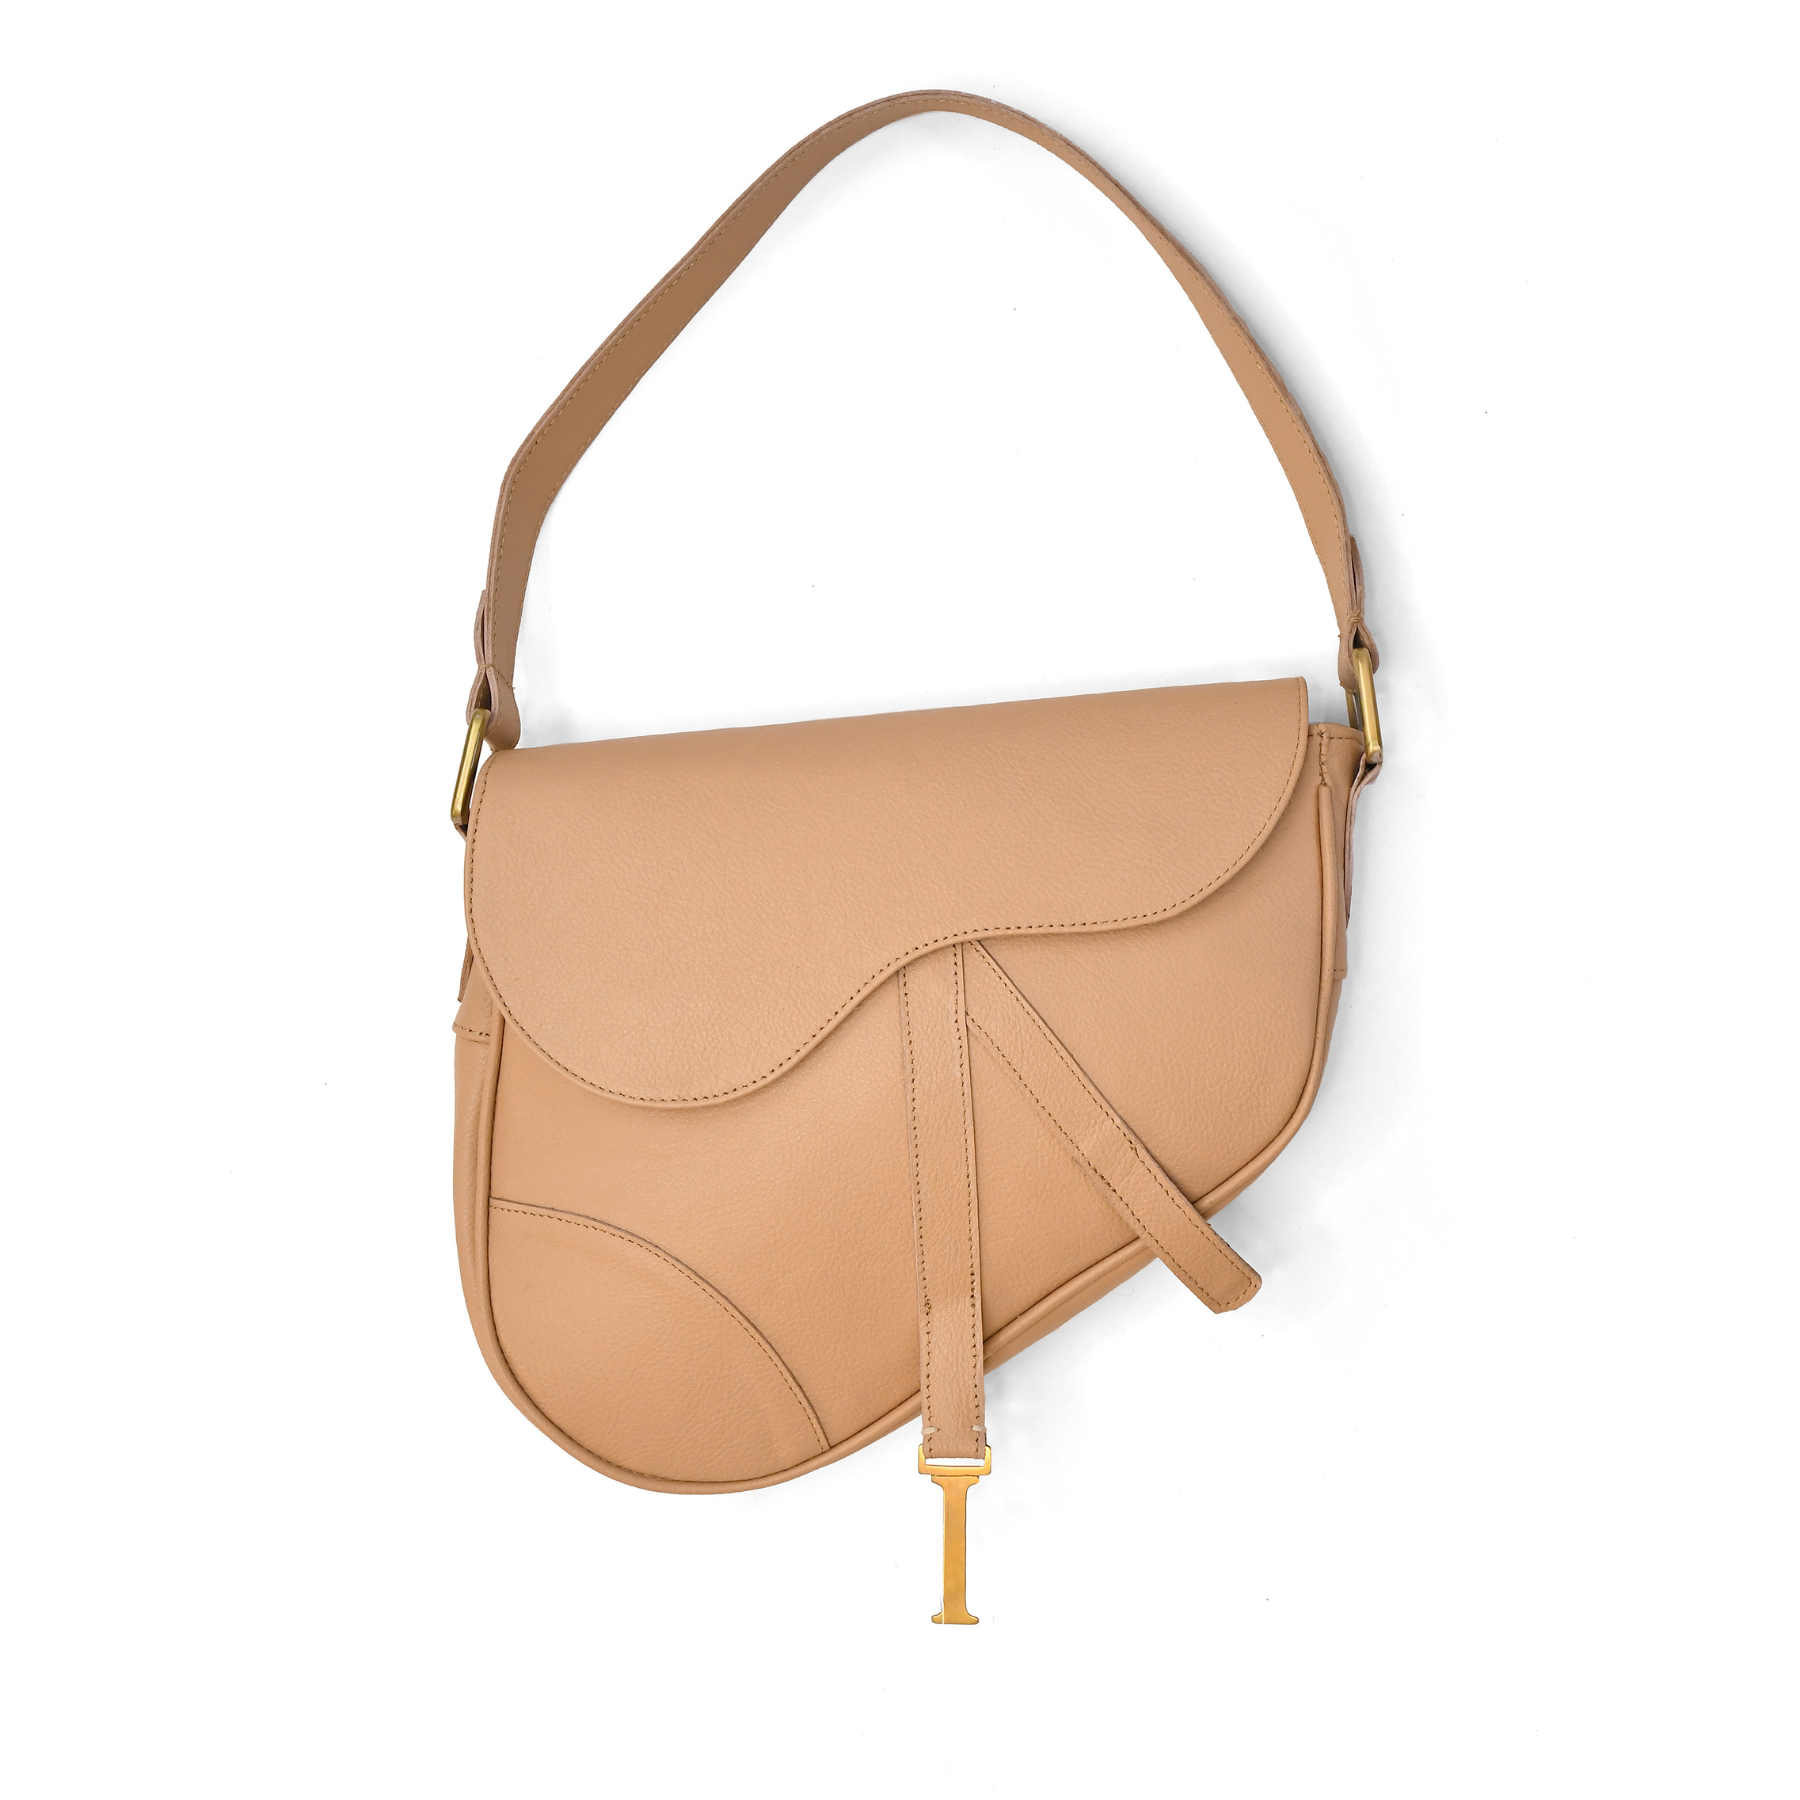 Gaucholife Nude Saddle Purse and Wallet